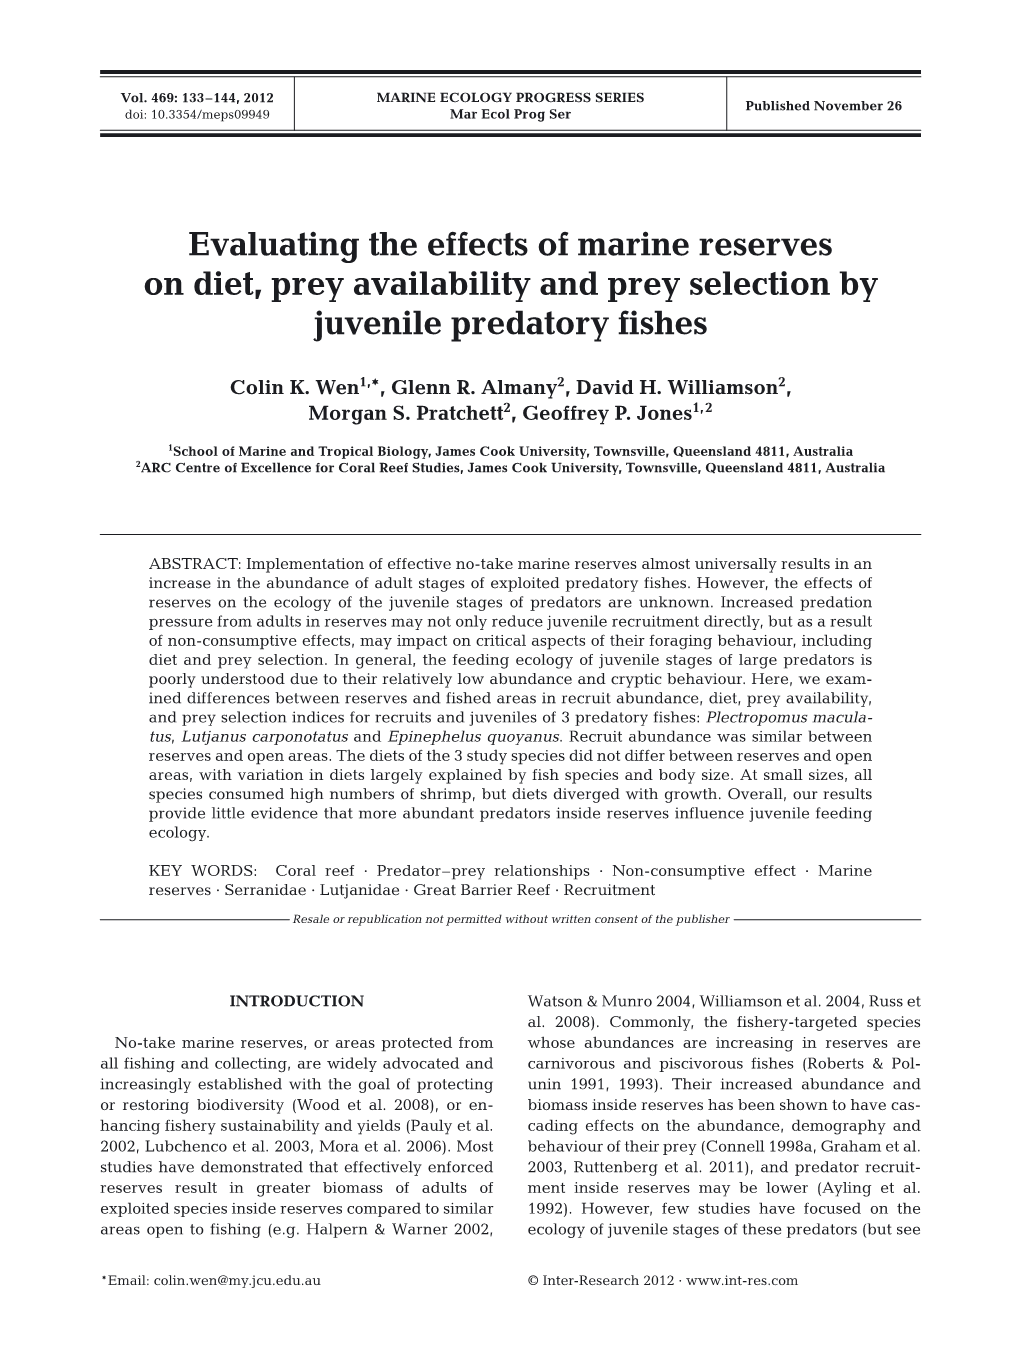 Evaluating the Effects of Marine Reserves on Diet, Prey Availability and Prey Selection by Juvenile Predatory Fishes